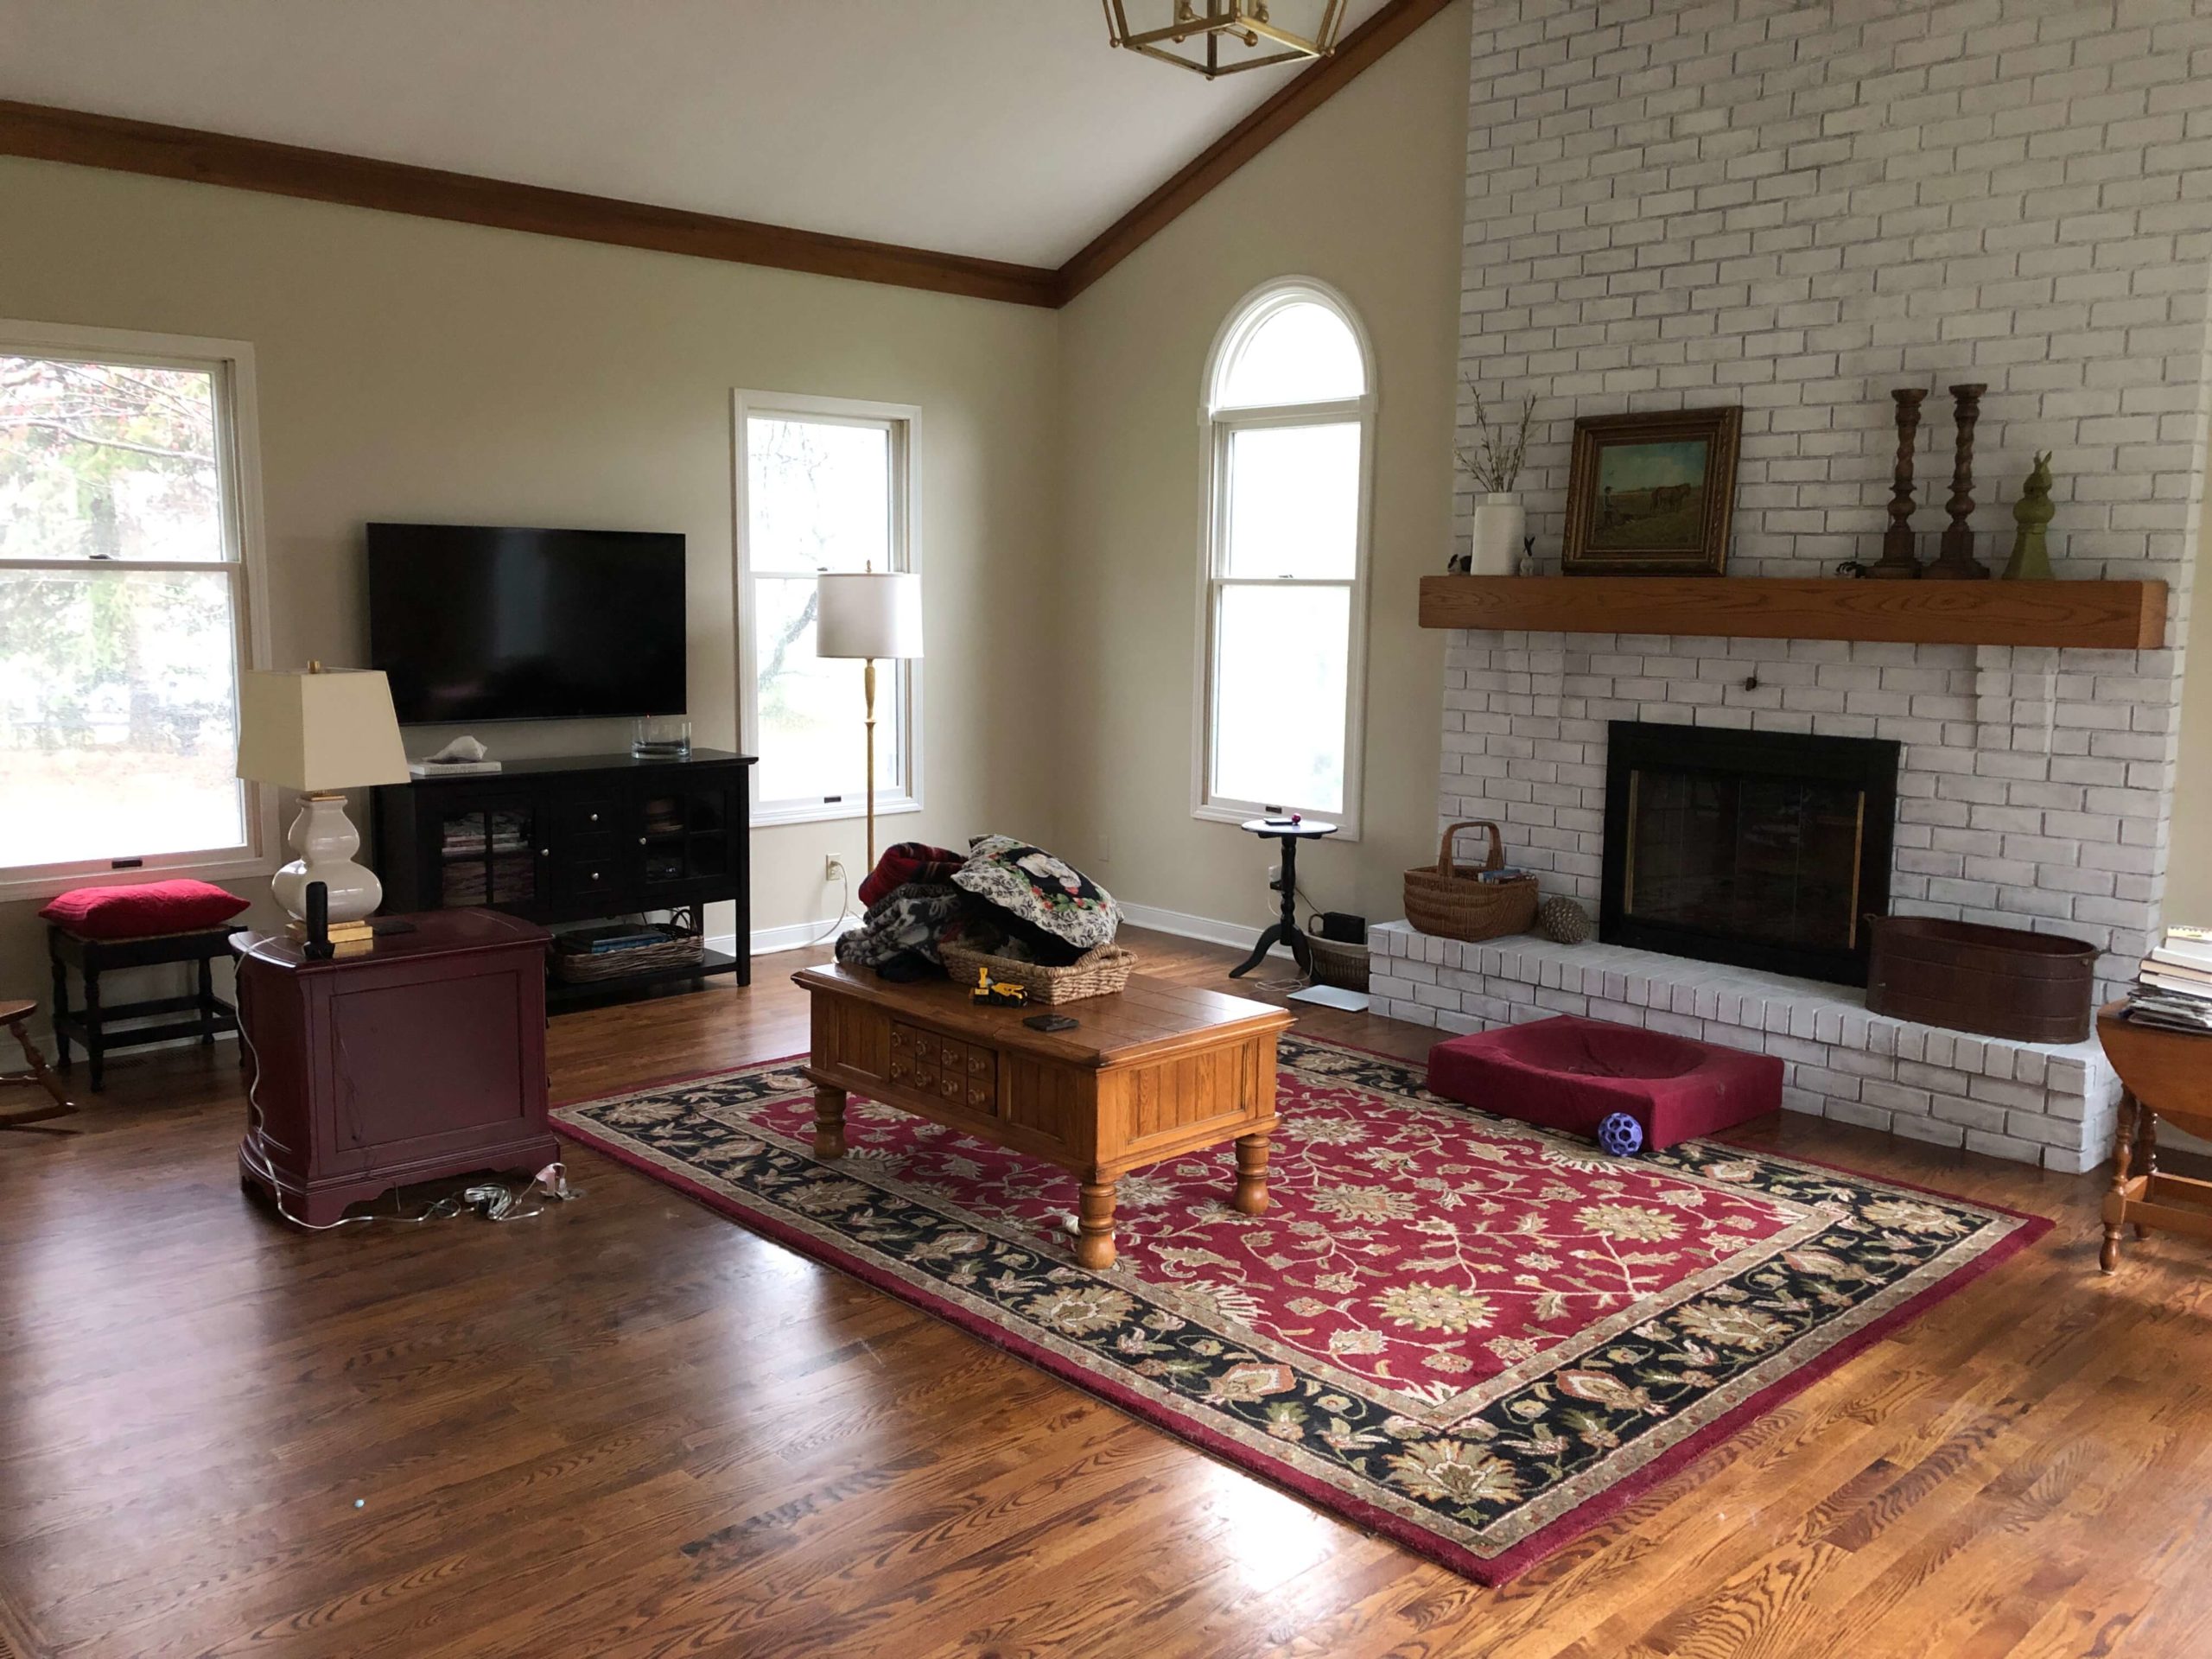 Red and Black Before Rug in Family Room Space Lindsey Putzier Design Studio Hudson, OH